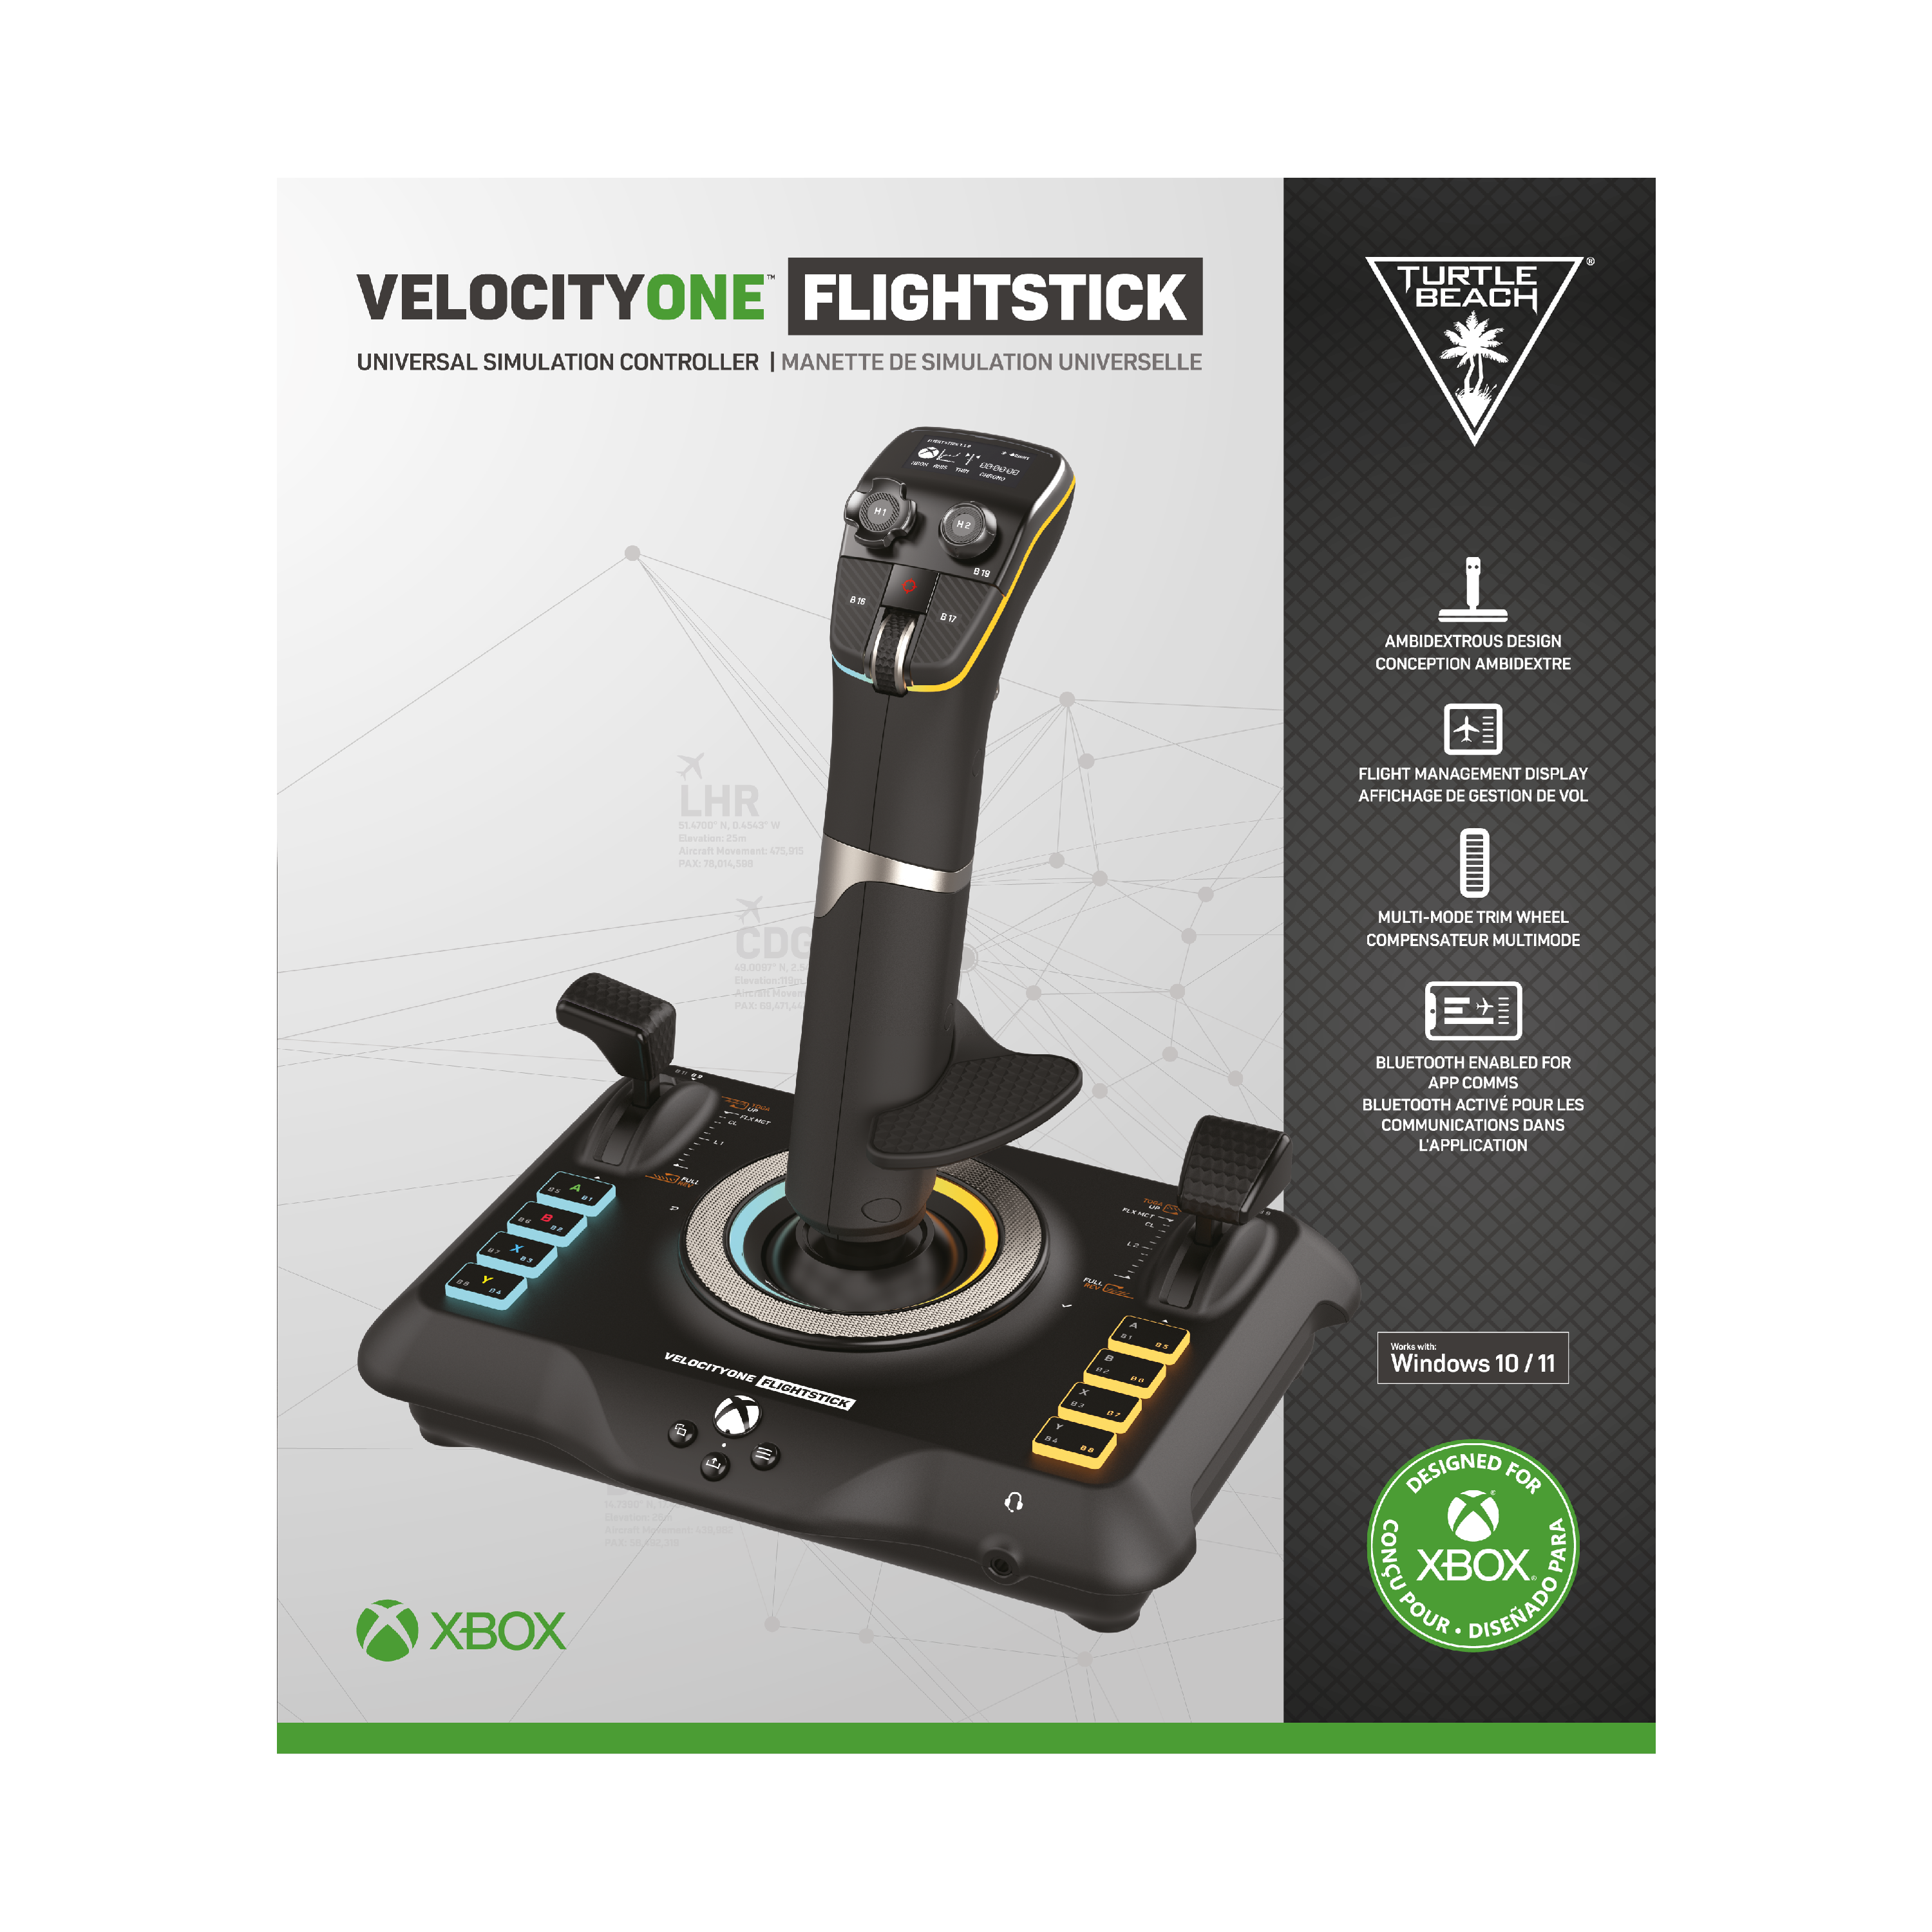 Learning to fly with the Turtle Beach VelocityOne Flight